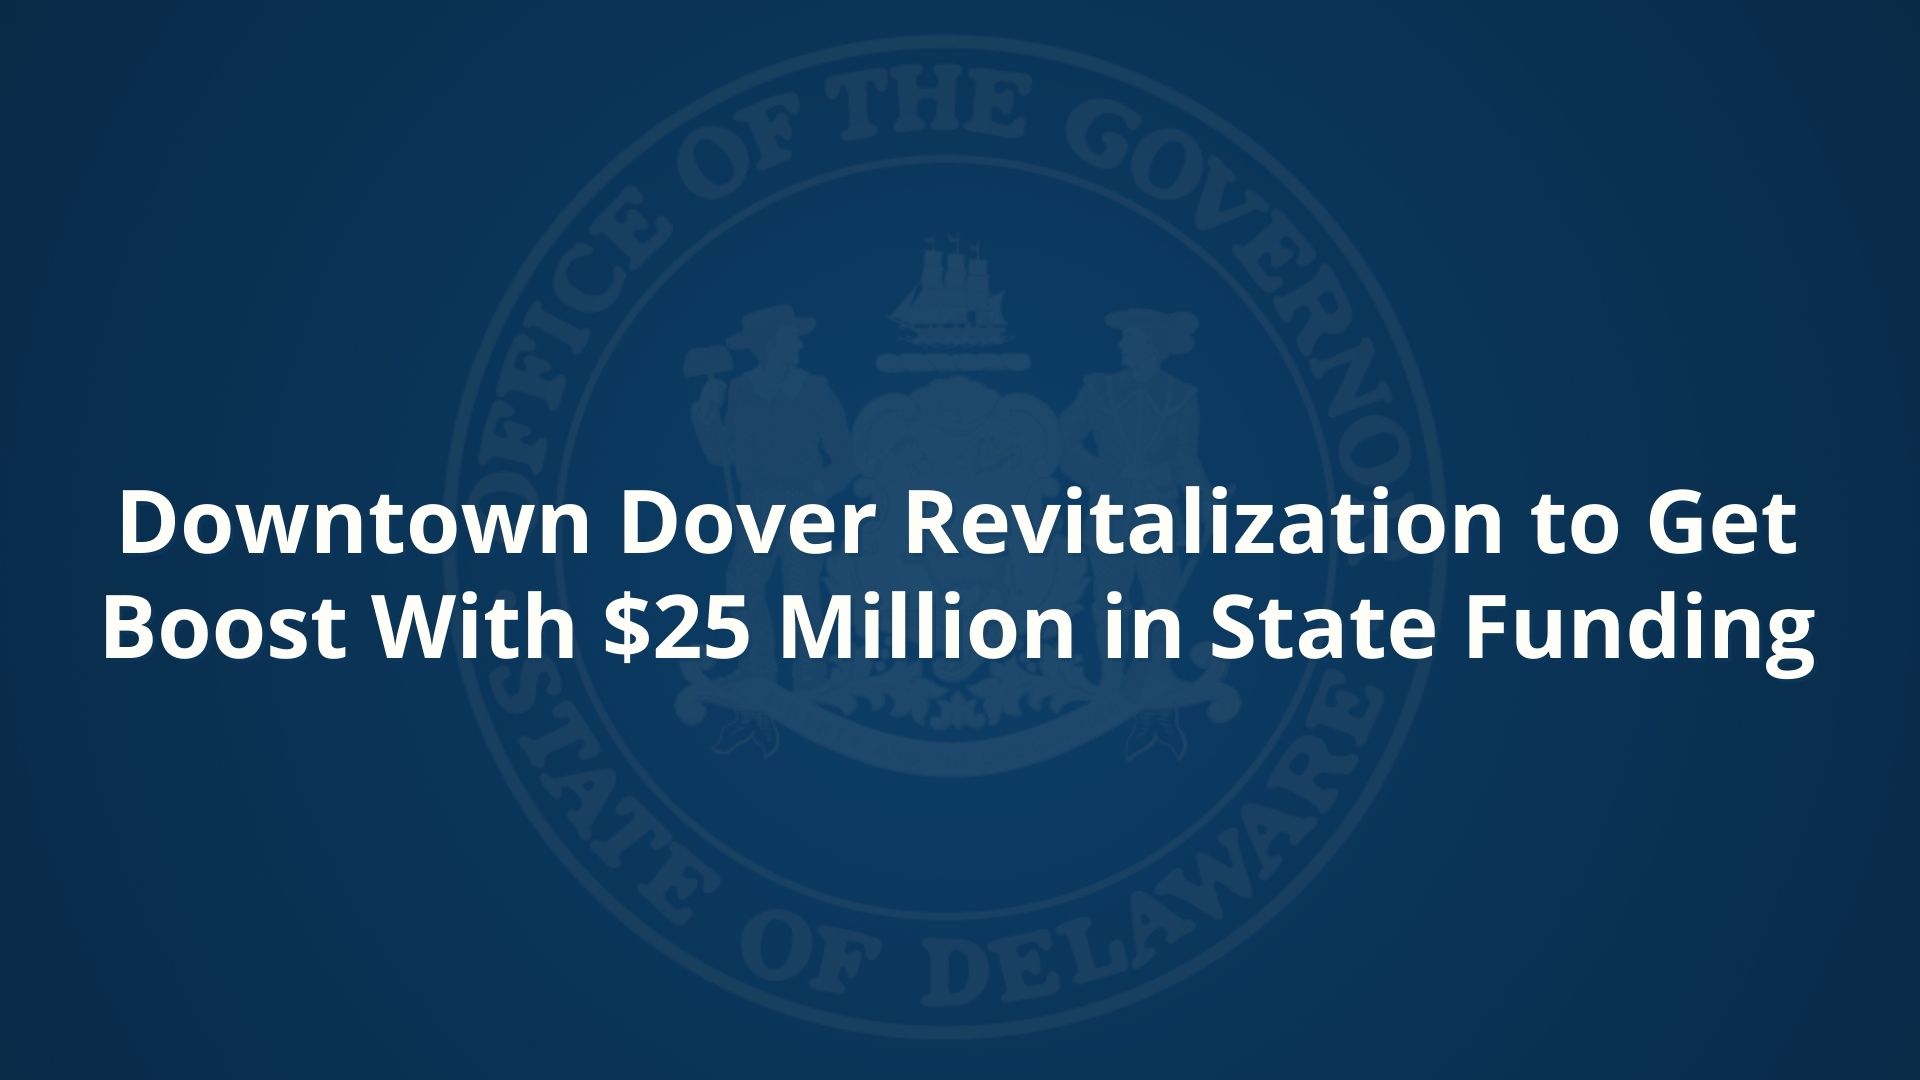 Downtown Dover Revitalization to Get Boost With $25 Million in State Funding